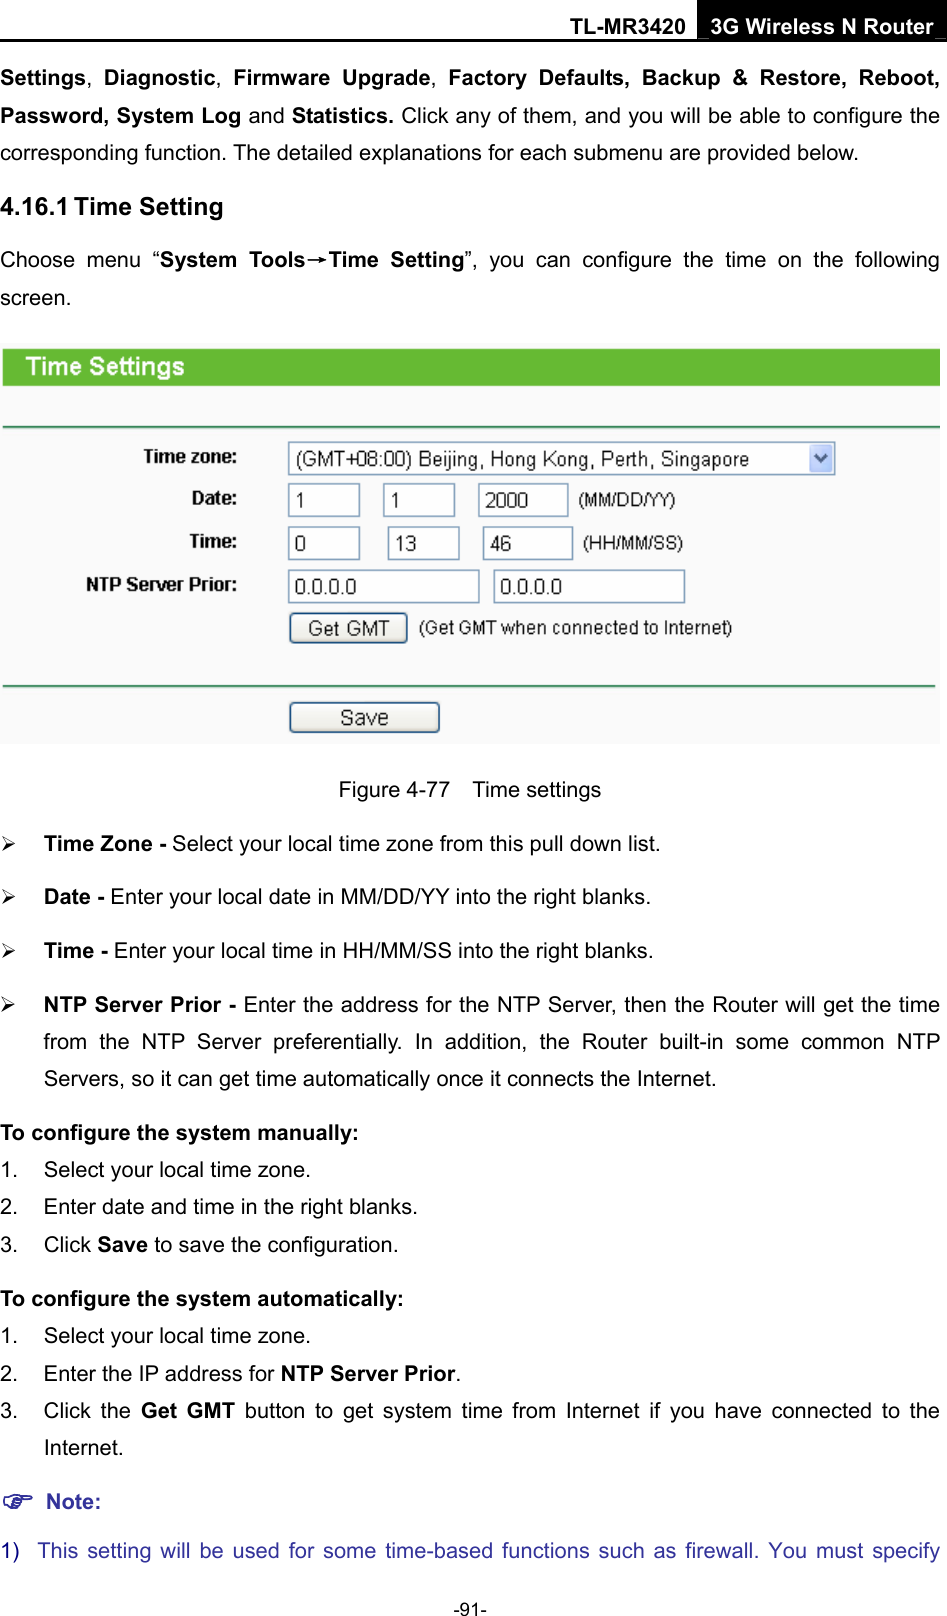 TL-MR3420 3G Wireless N Router -91- Settings,  Diagnostic,  Firmware Upgrade,  Factory Defaults, Backup &amp; Restore, Reboot, Password, System Log and Statistics. Click any of them, and you will be able to configure the corresponding function. The detailed explanations for each submenu are provided below. 4.16.1 Time Setting Choose menu “System Tools→Time Setting”, you can configure the time on the following screen.  Figure 4-77  Time settings ¾ Time Zone - Select your local time zone from this pull down list. ¾ Date - Enter your local date in MM/DD/YY into the right blanks. ¾ Time - Enter your local time in HH/MM/SS into the right blanks. ¾ NTP Server Prior - Enter the address for the NTP Server, then the Router will get the time from the NTP Server preferentially. In addition, the Router built-in some common NTP Servers, so it can get time automatically once it connects the Internet. To configure the system manually: 1.  Select your local time zone. 2.  Enter date and time in the right blanks. 3. Click Save to save the configuration. To configure the system automatically: 1.  Select your local time zone. 2.  Enter the IP address for NTP Server Prior. 3. Click the Get GMT button to get system time from Internet if you have connected to the Internet. ) Note: 1)  This setting will be used for some time-based functions such as firewall. You must specify 